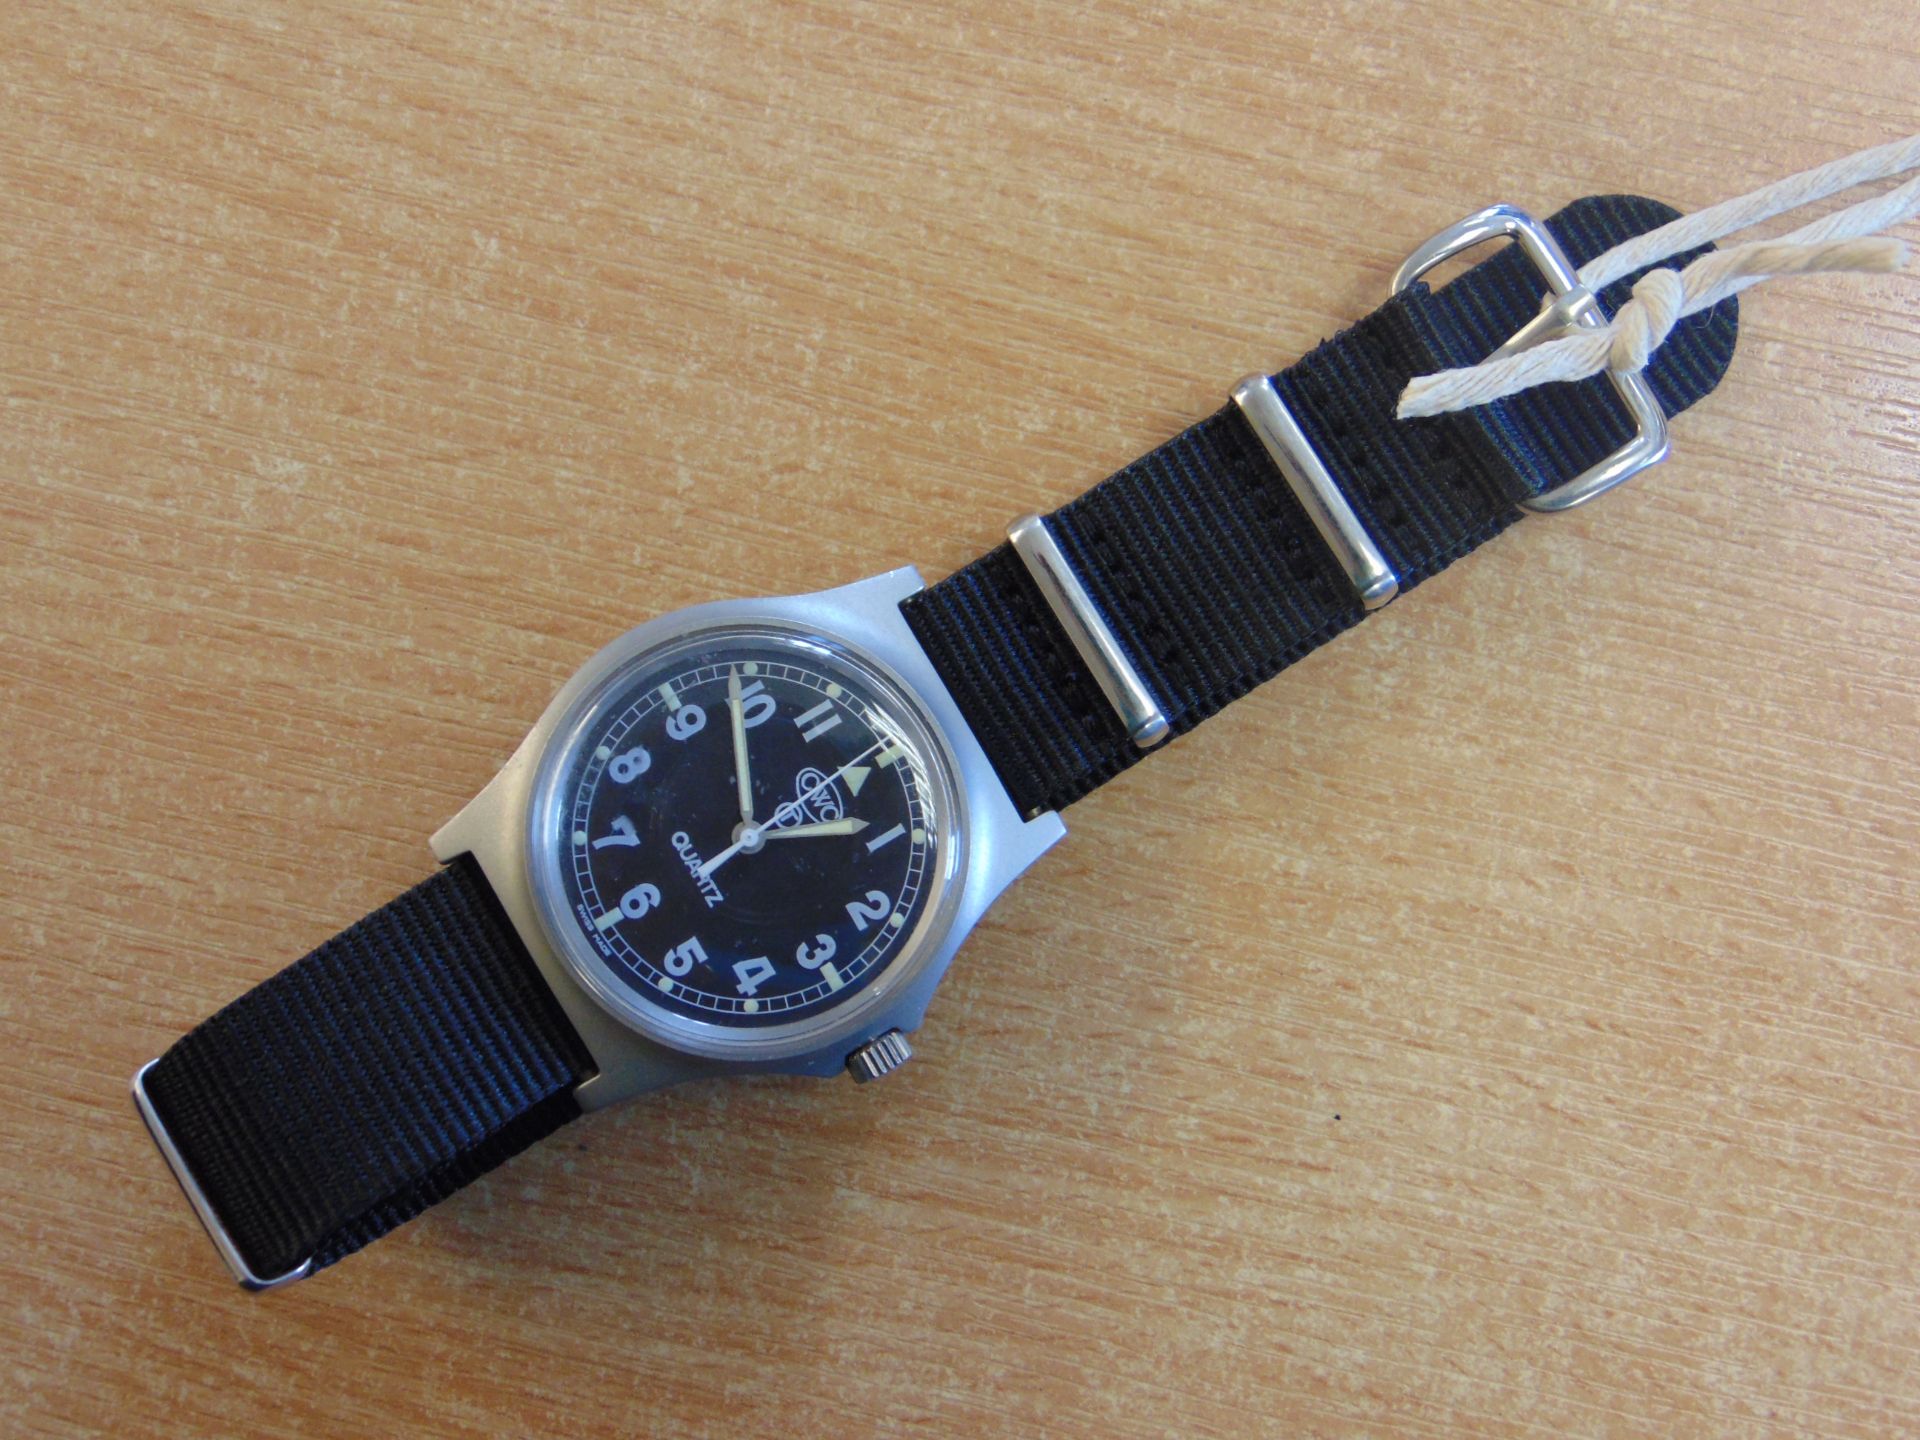 UNIQUE CWC 0552 ROYAL MARINES/ ROYAL NAVY ISSUE SERVICE WATCH DATED 1990 ** GULF WAR** SN.66054